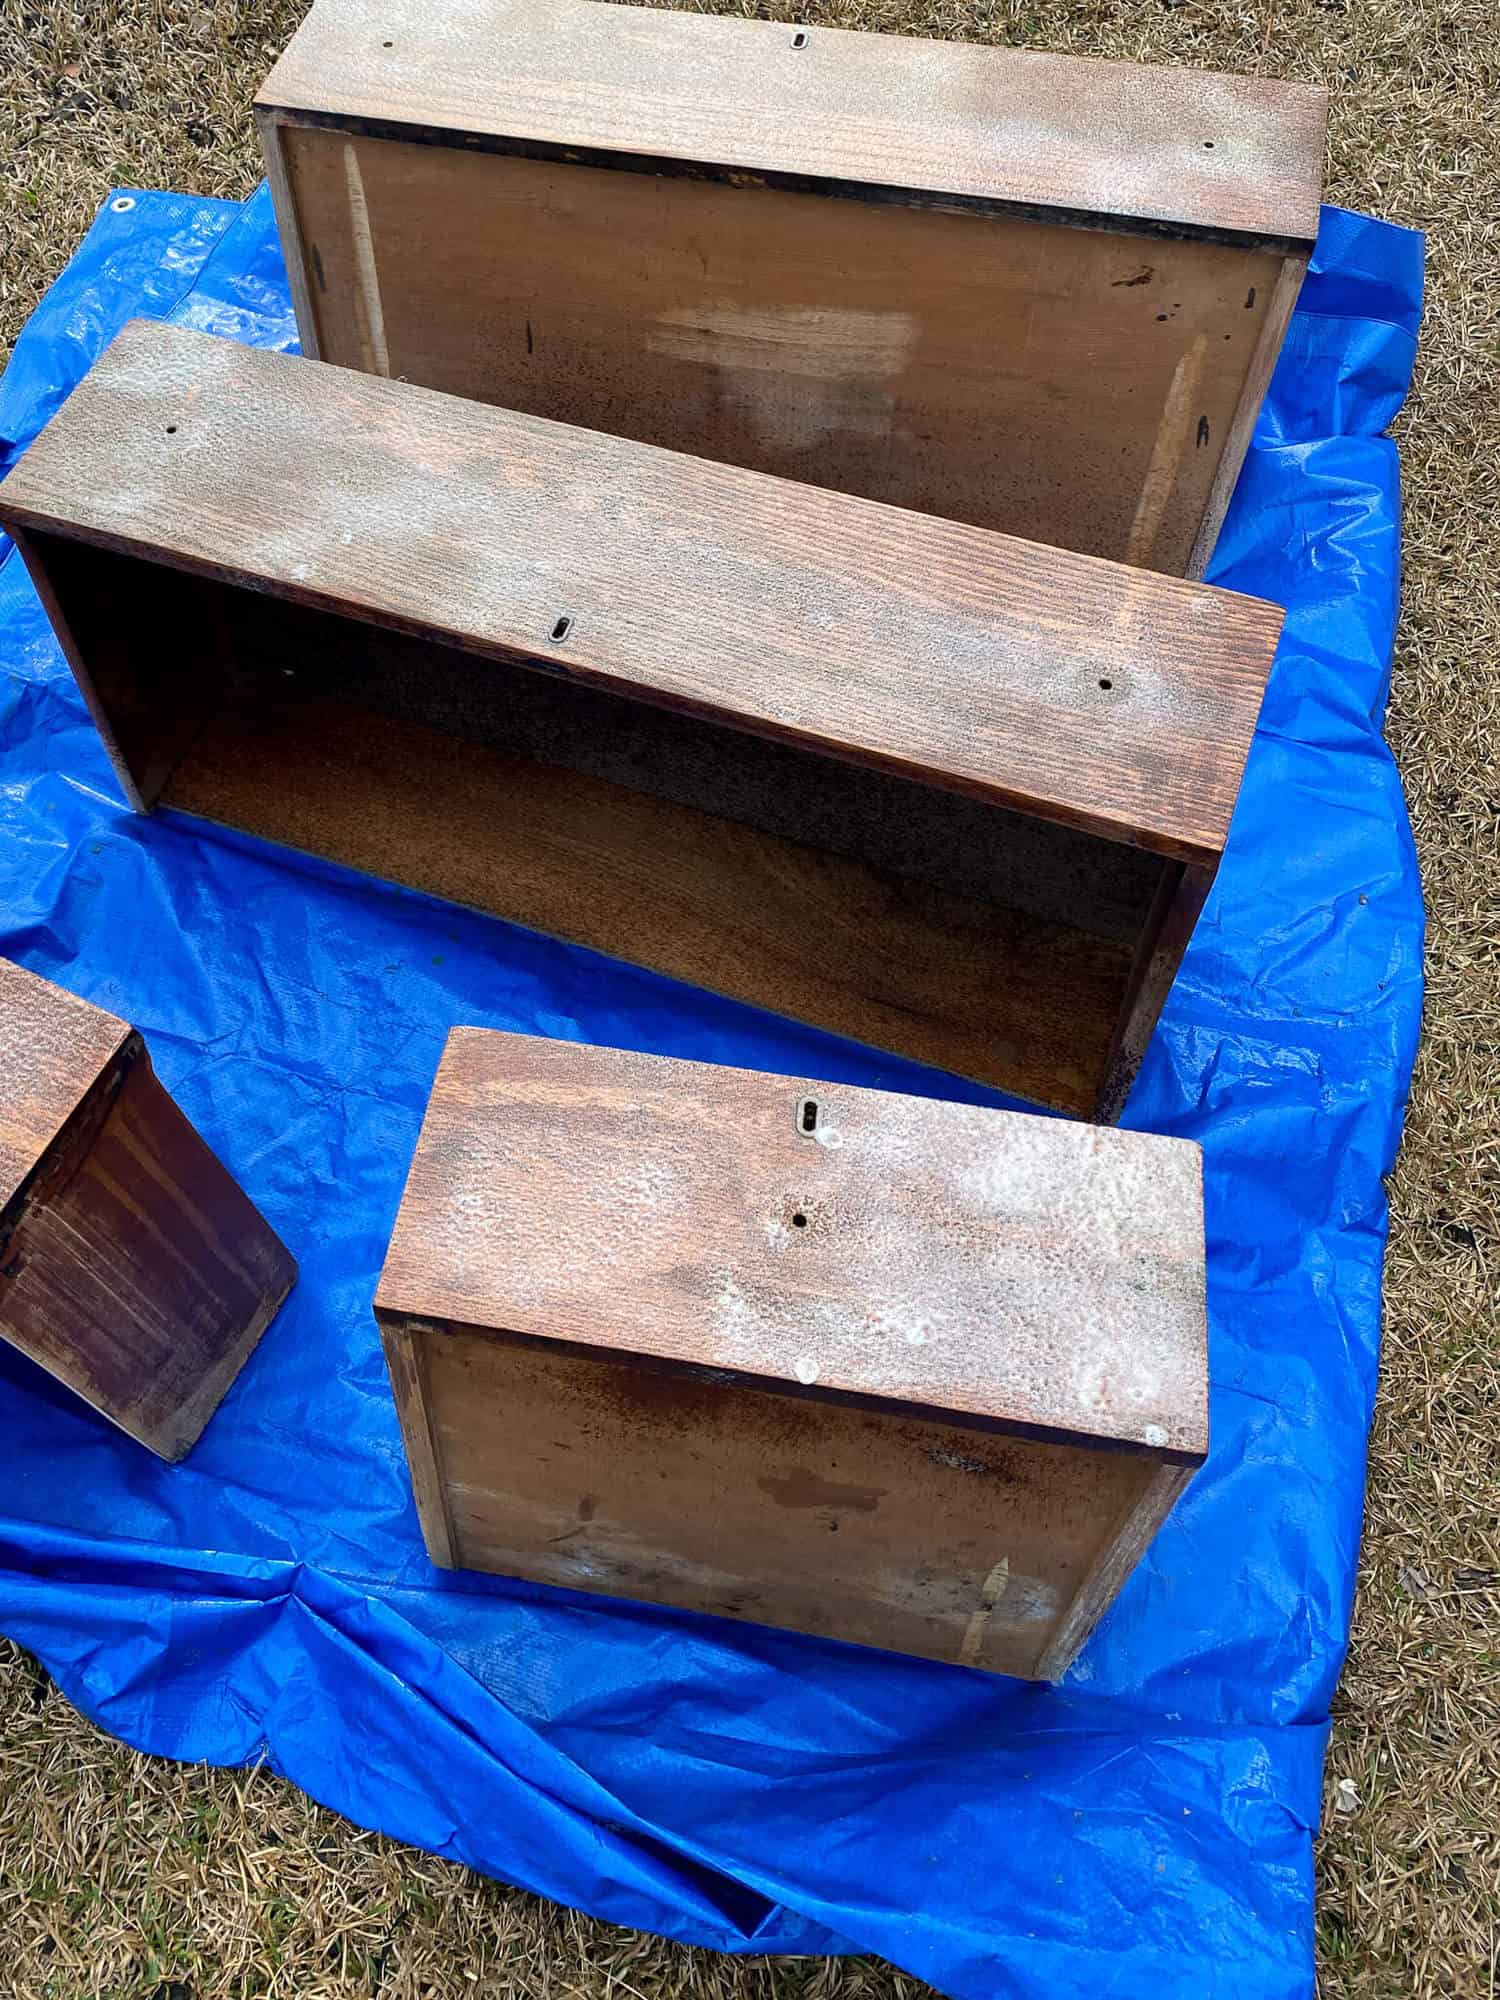 wood drawers on blue outdoor tarp sprayed with oven cleaner to strip finish